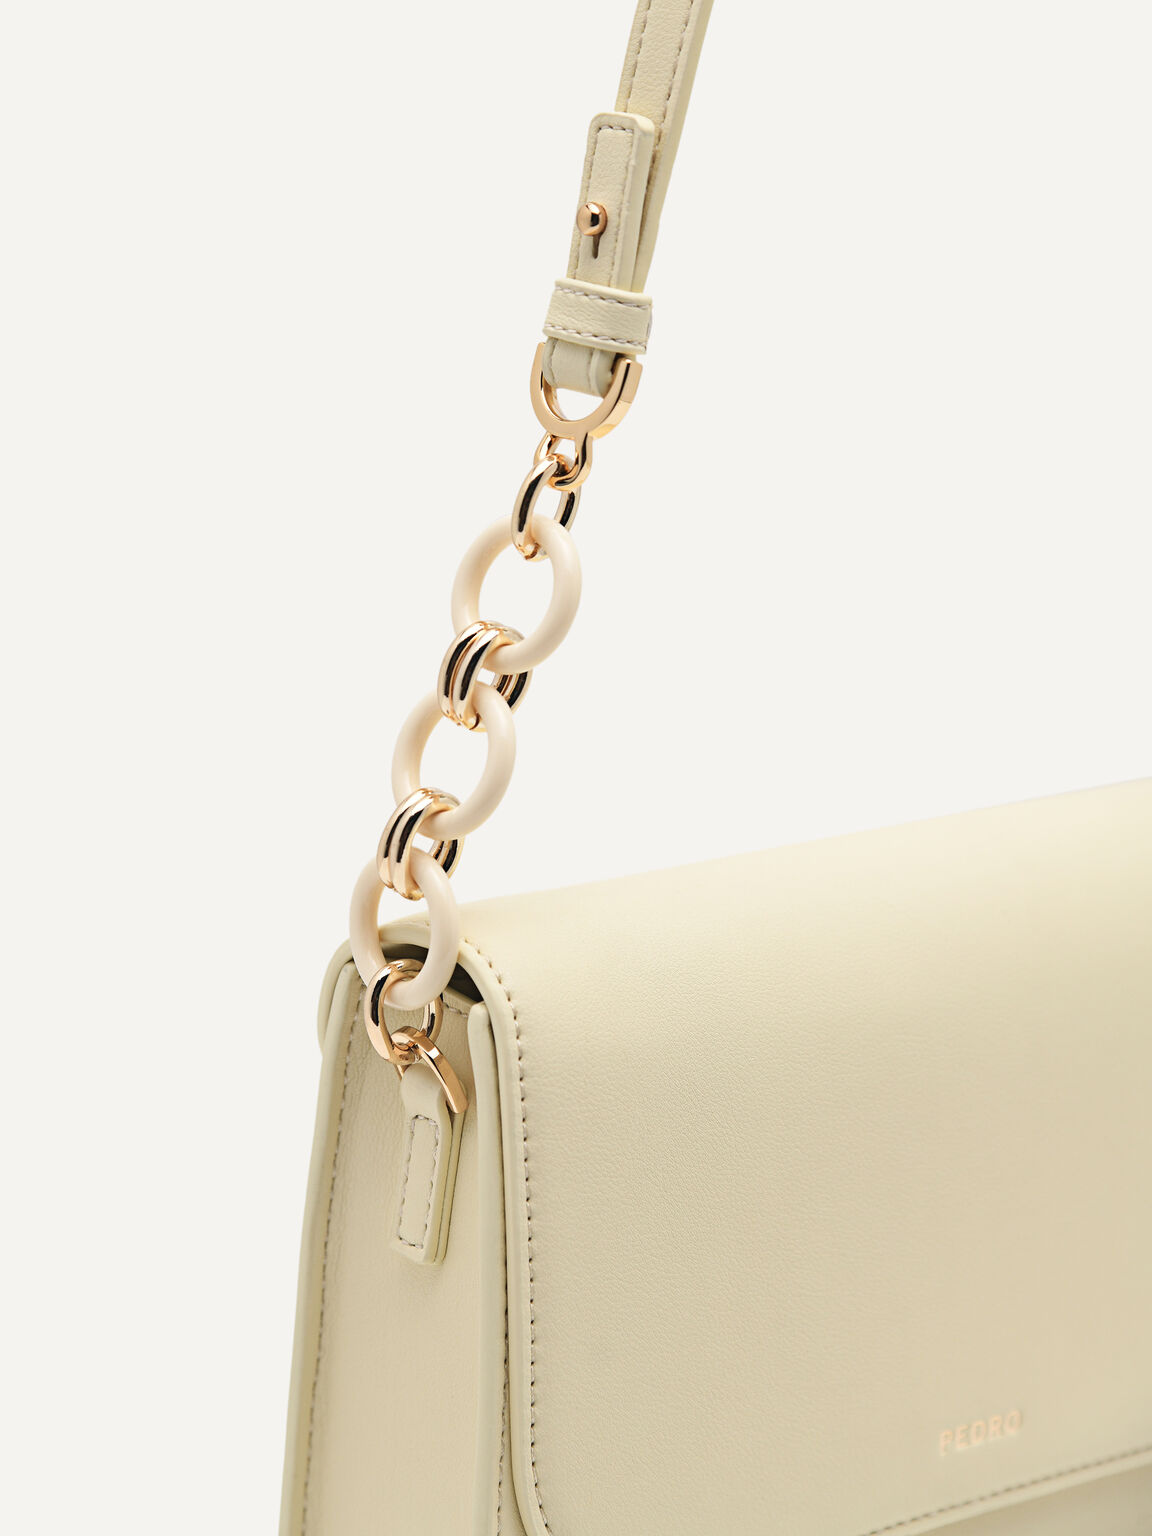 PEDRO Shoes Pedro Shoes Shoulder Bag with Pearl Closure - Yellow 66.00